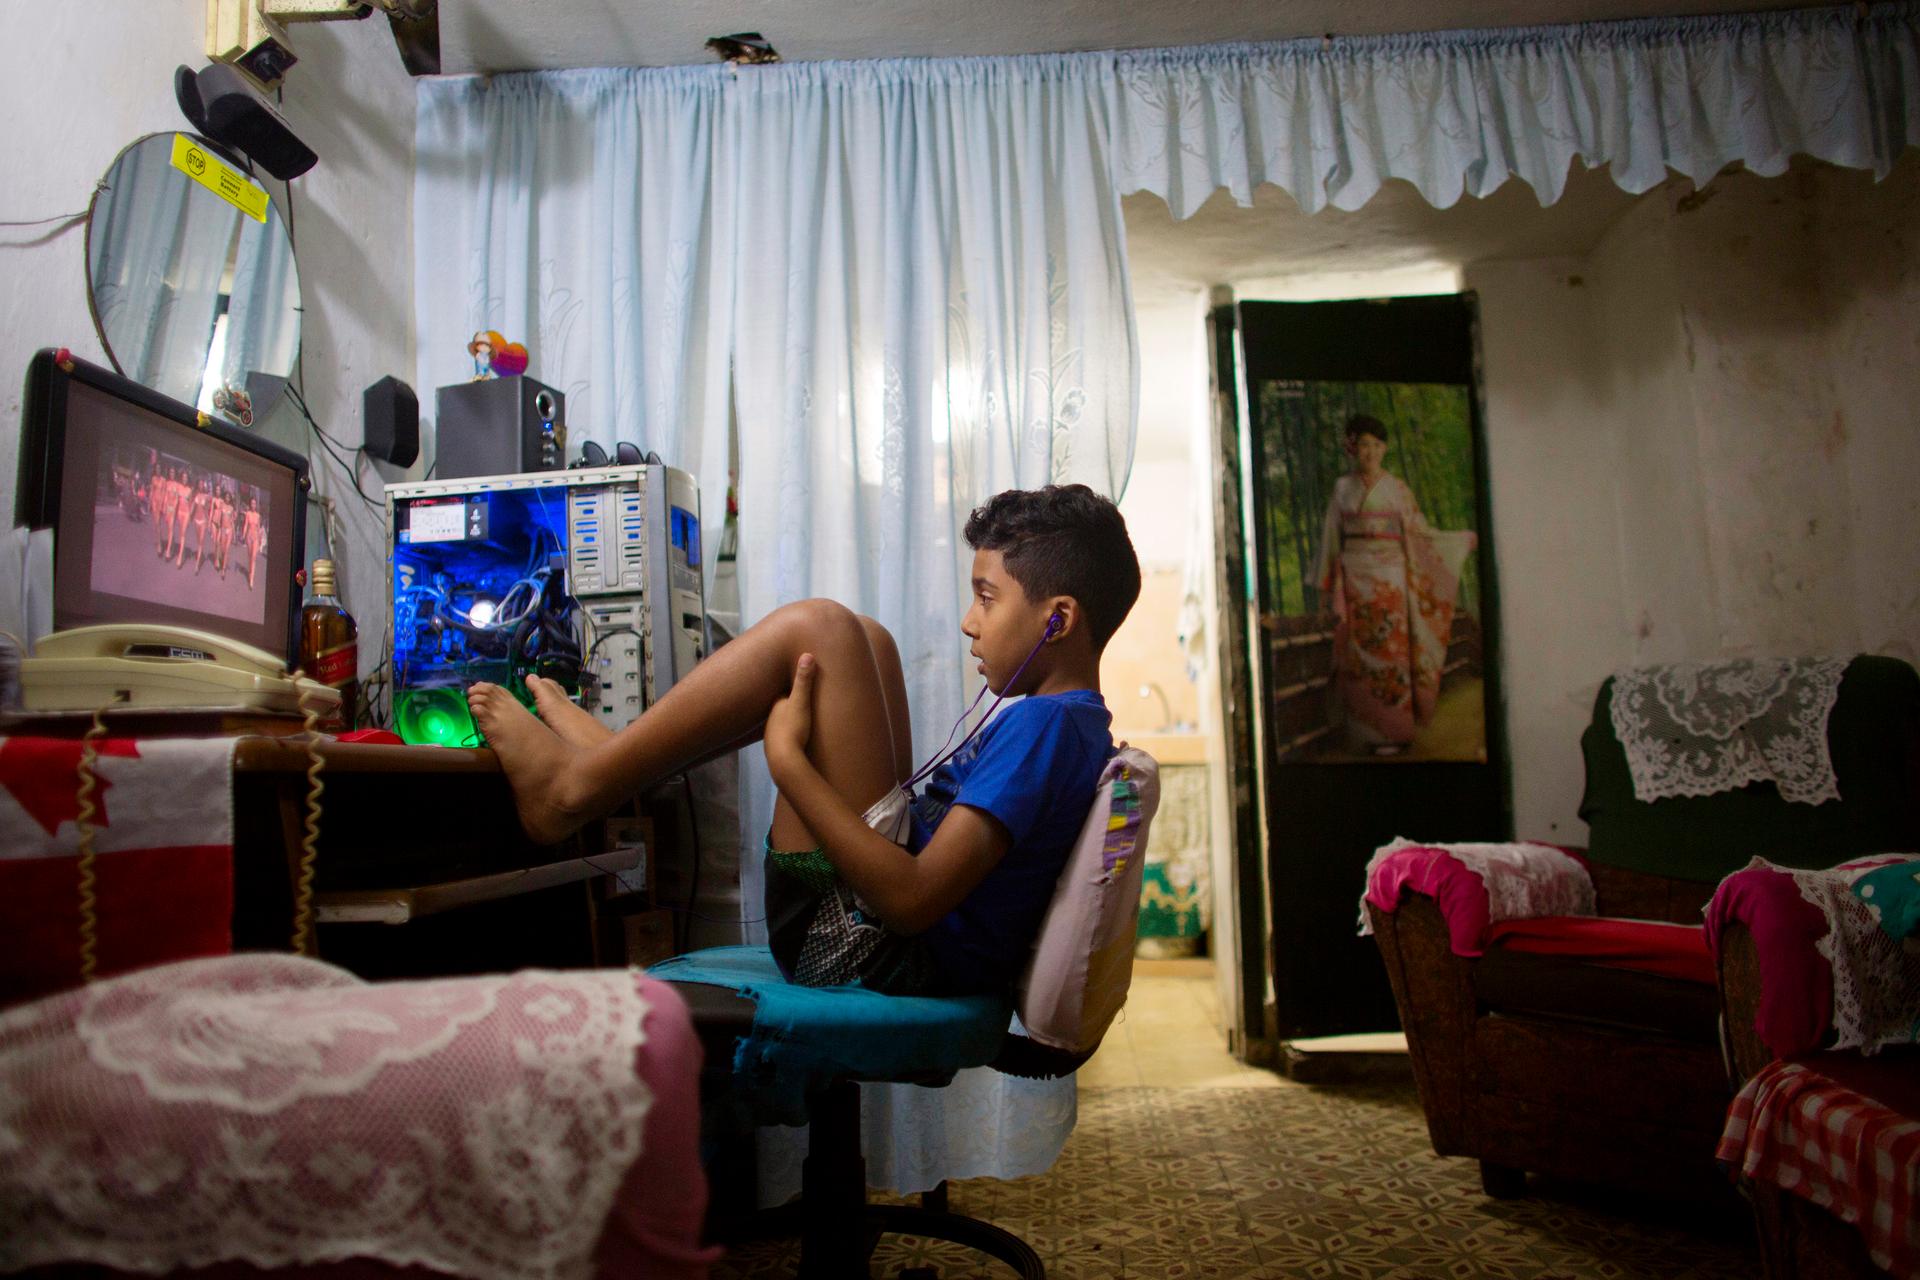 Havana resident Kevin Lachaise watches a recorded TV show on a computer screen in the living room of his home.